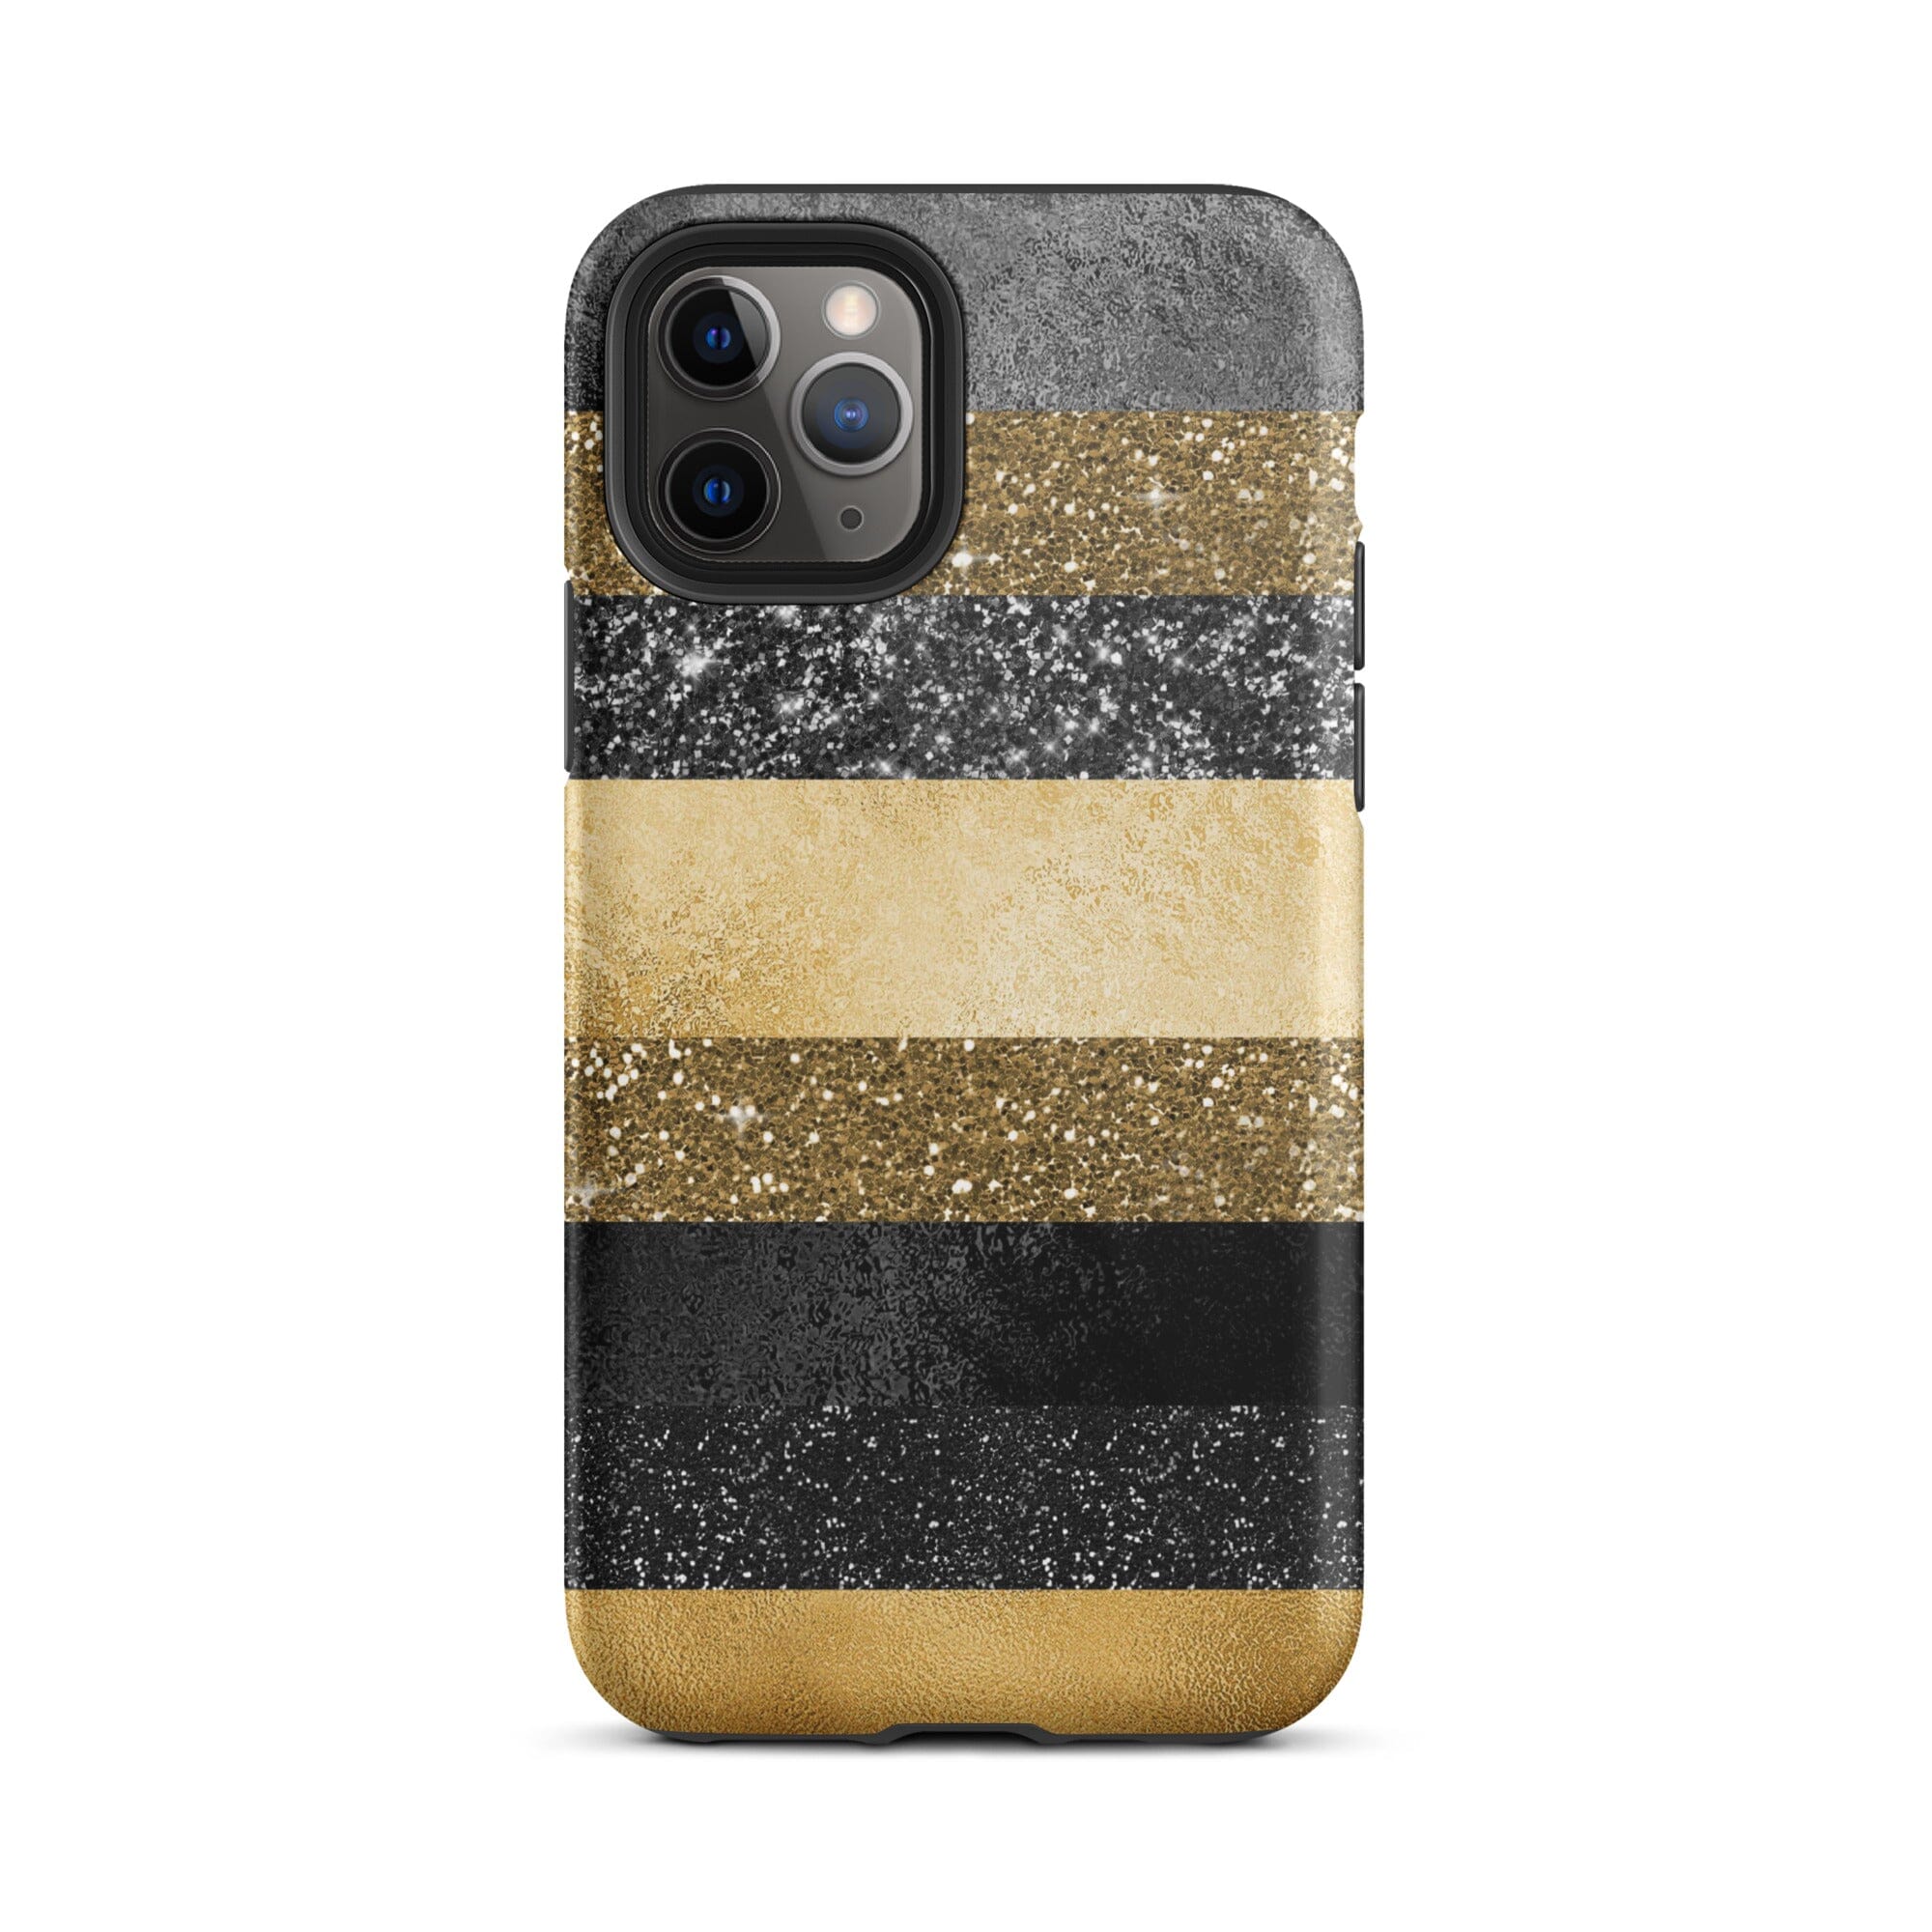 Black/Gold Glitter Stripes iPhone Case - KBB Exclusive Knitted Belle Boutique iPhone 11 